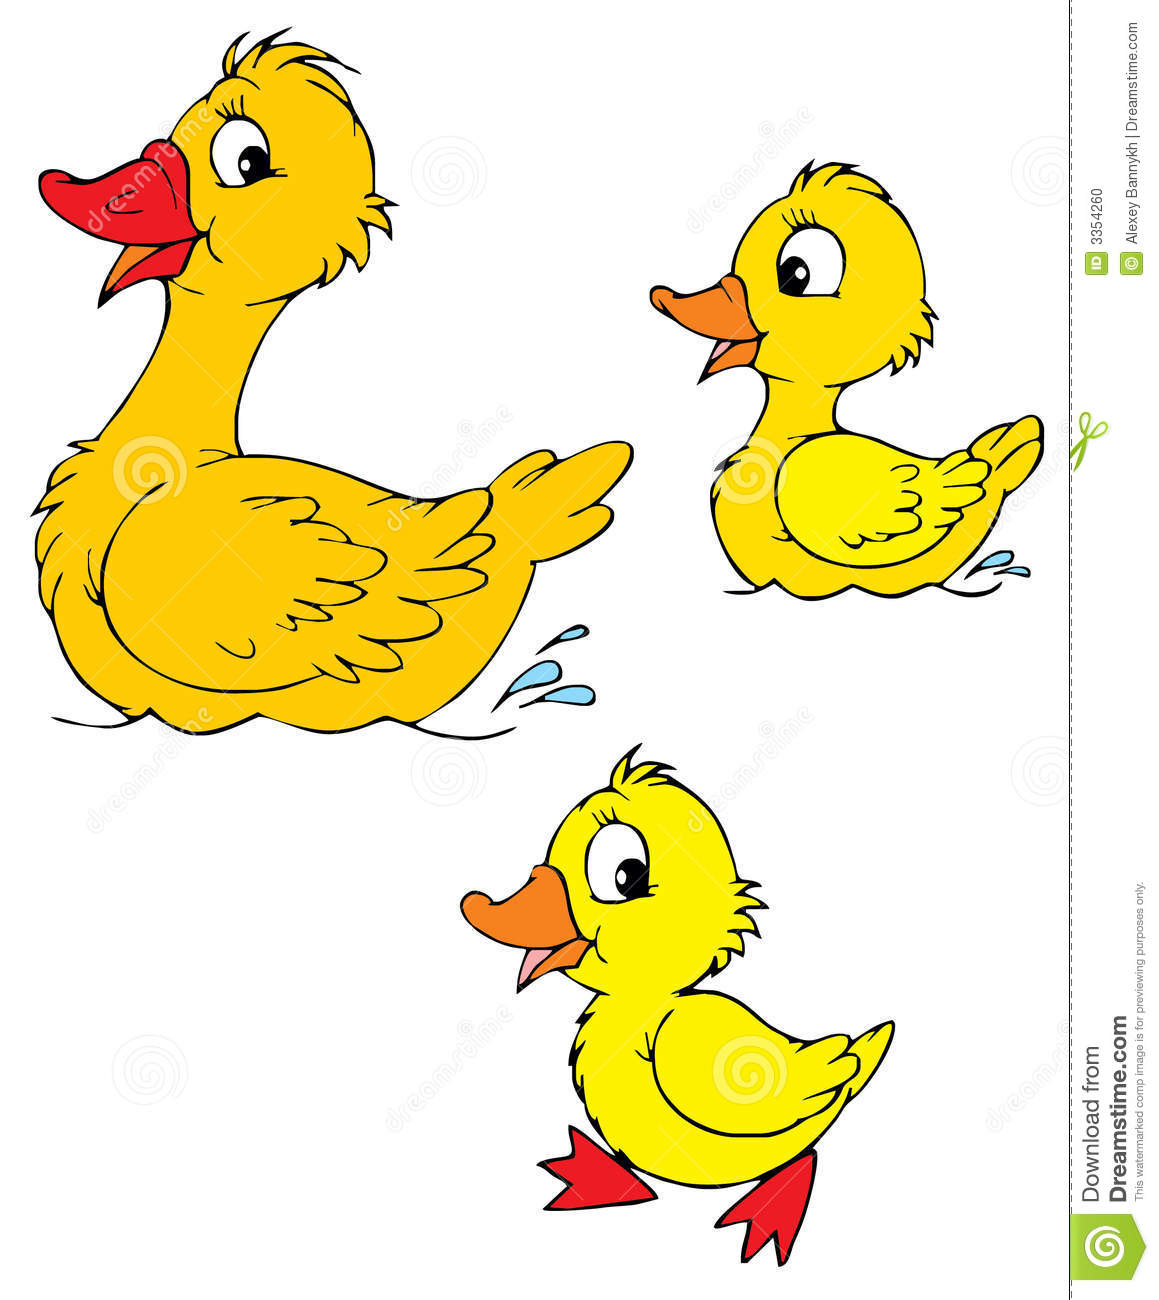 Ducks clipart duckling. Duck and station 